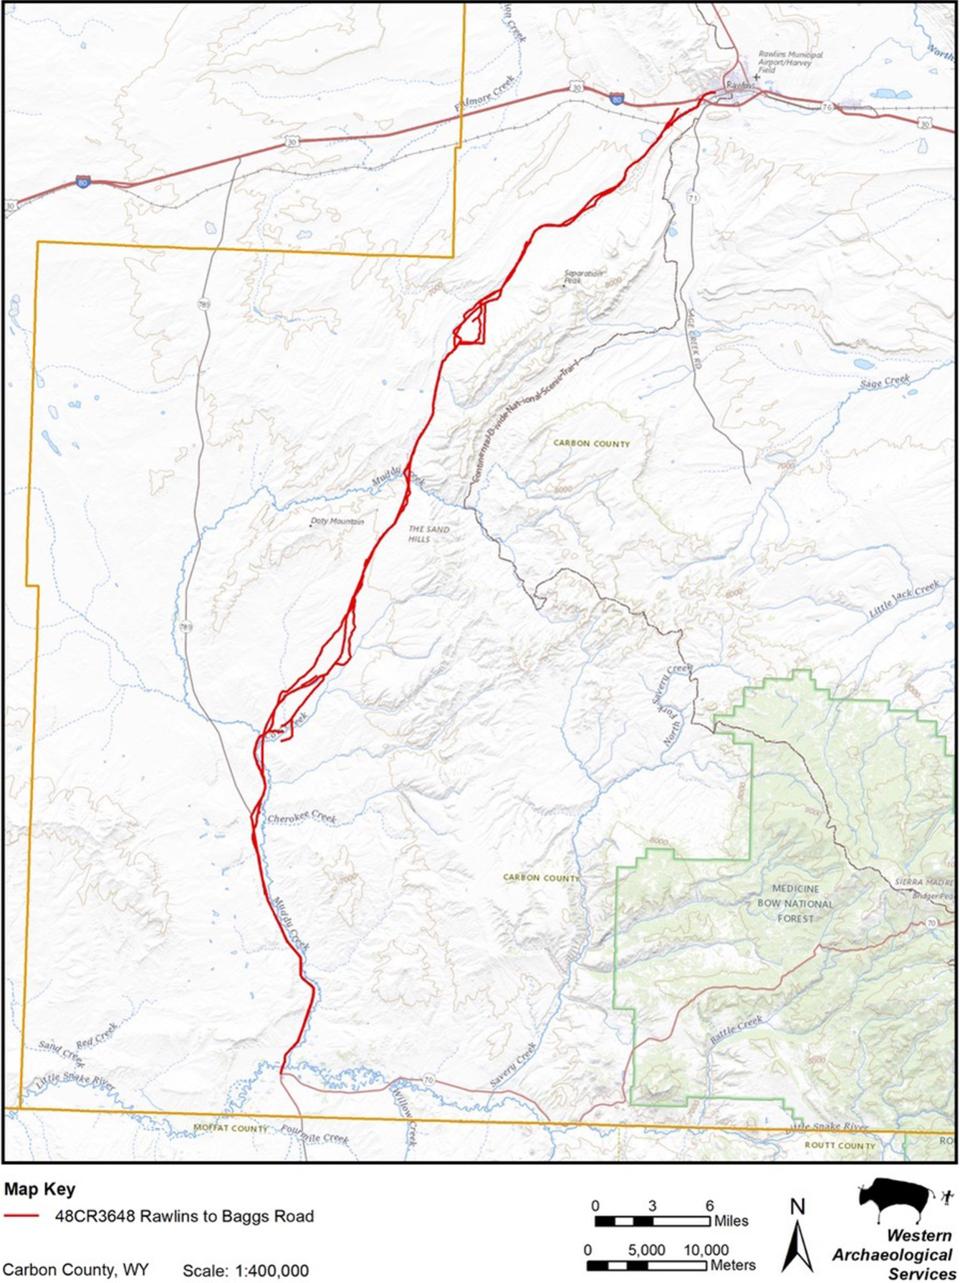 The Rawlins to Baggs wagon road headed south from Rawlins, Wyoming, crossed the Overland Trail along Muddy Creek and crossed the Cherokee Trail on Cherokee Creek. From there it continued south, ultimately ending at Meeker, Colorado on the Ute White River Agency. Western Archaeological Services.